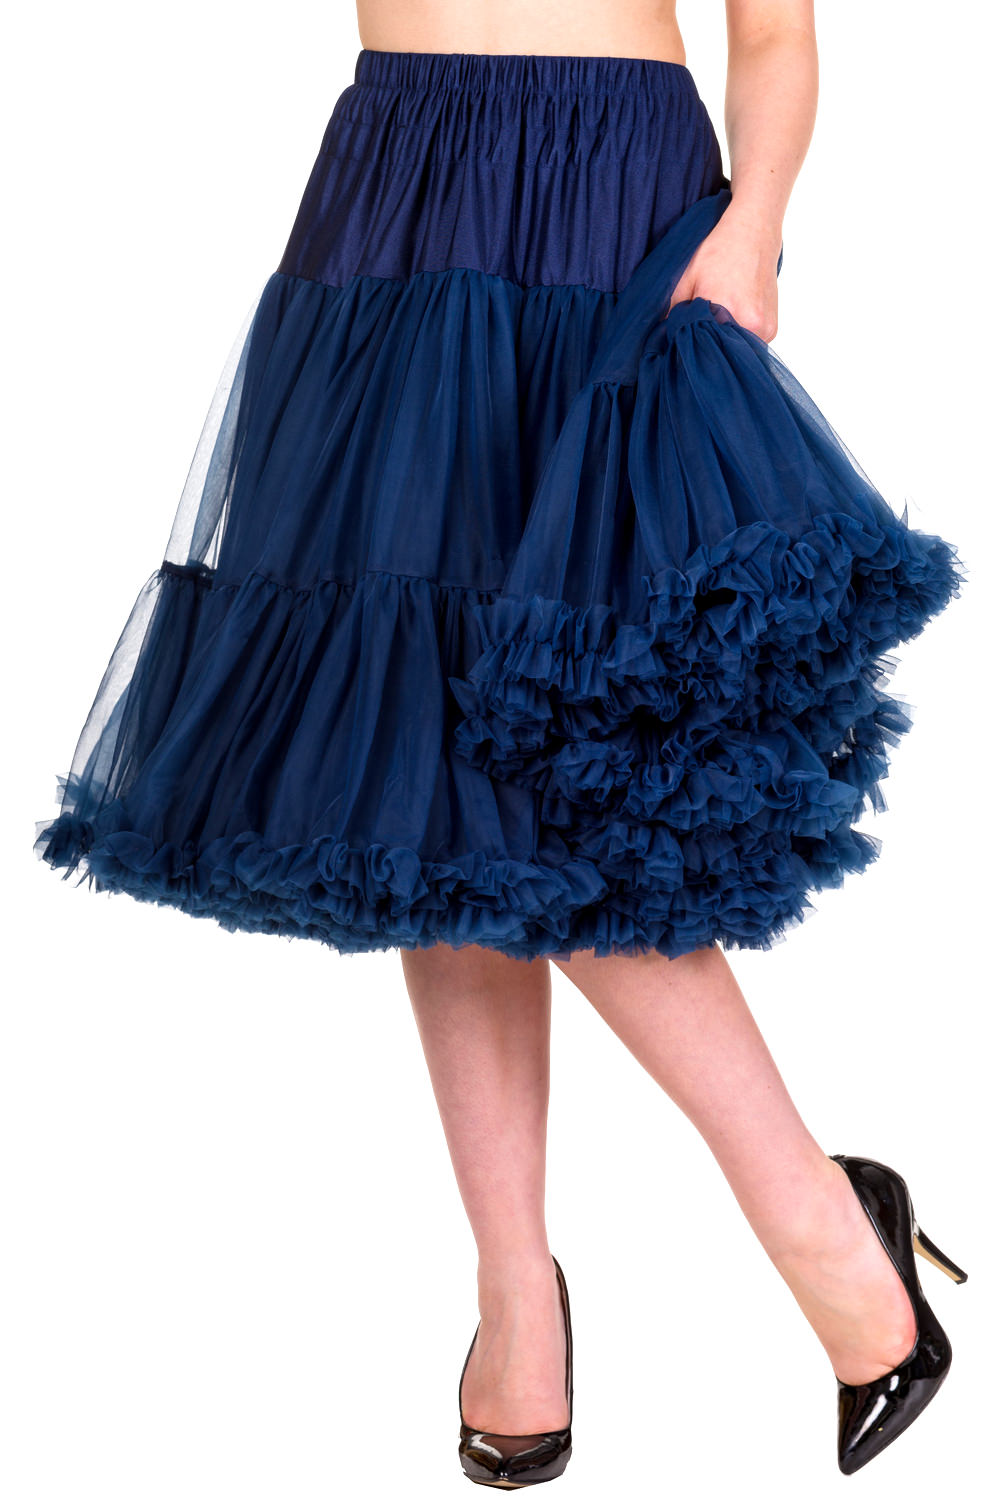 Dancing Days Lifeforms 50s Style 25"-27" Long Petticoat In Navy Blue; Dancing Days; Lifeforms Petticoat; 50s Style; 25"-27" Long Petticoat; Navy Blue